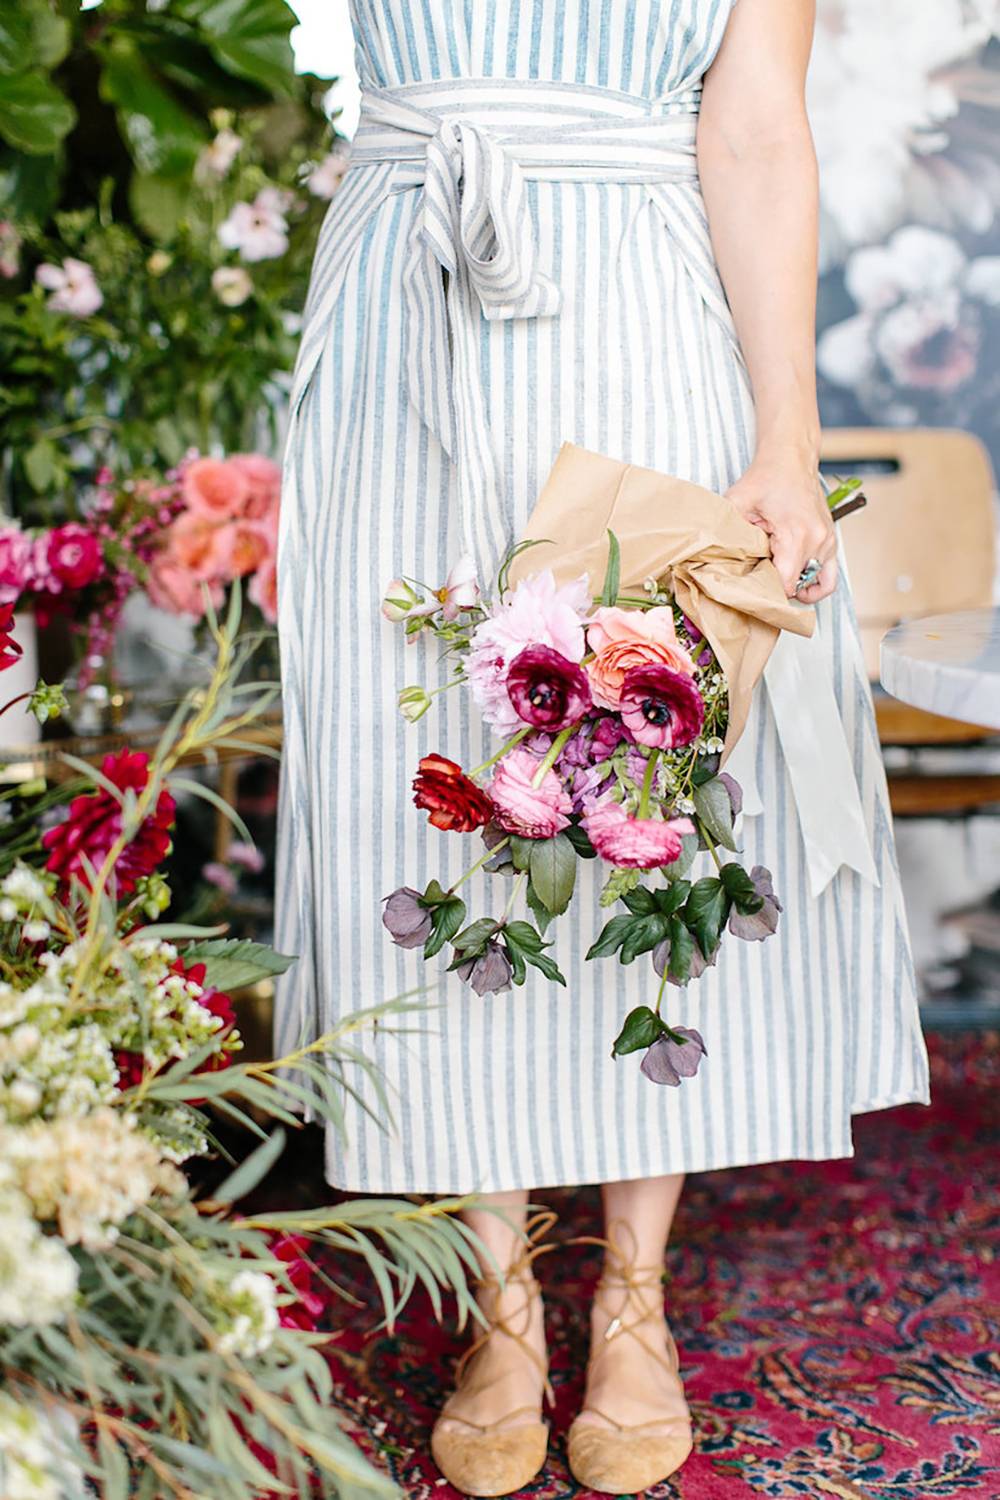 The lower half of a woman in a blue dress holding a bouquet.